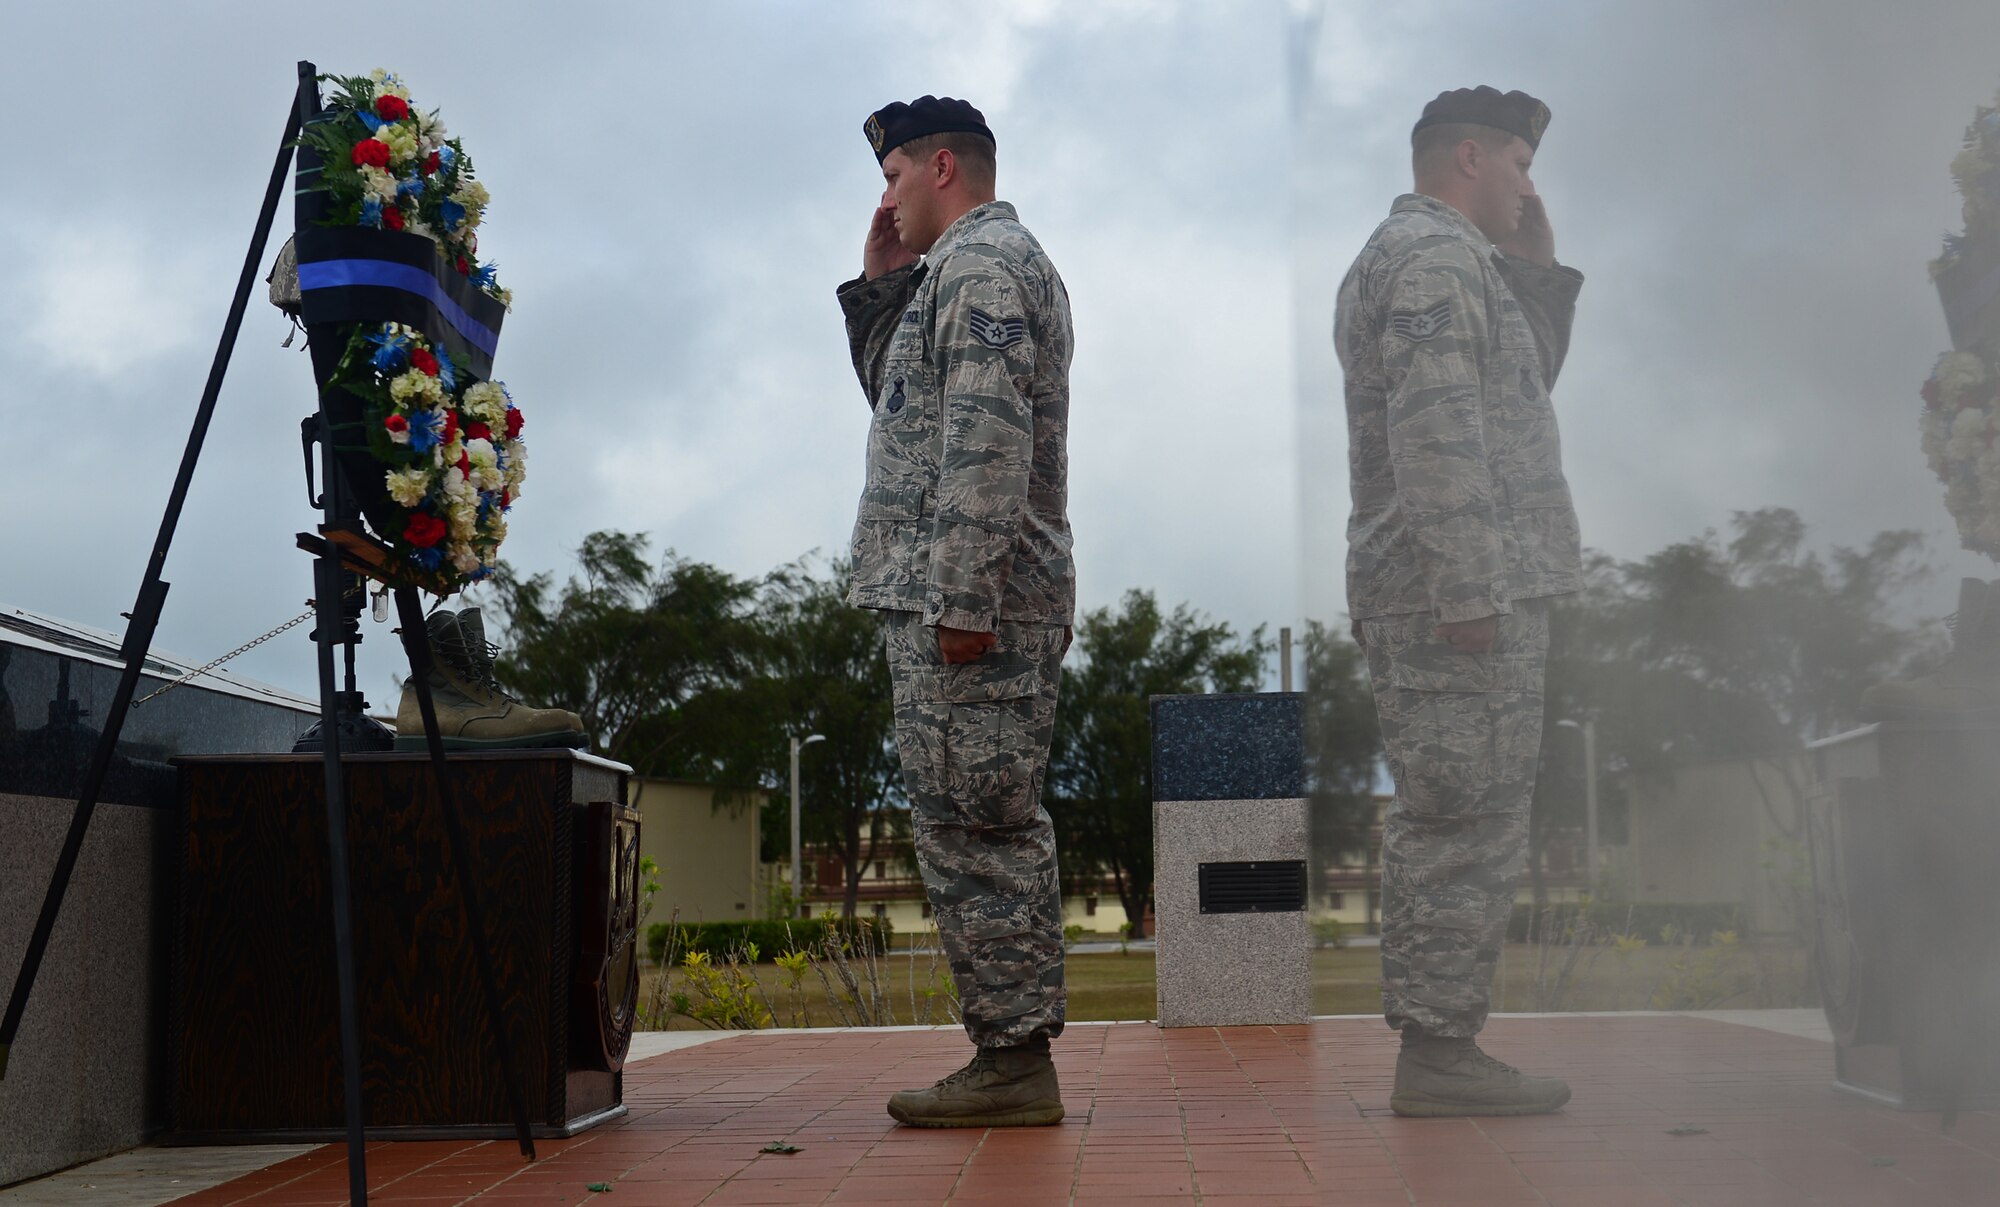 Staff Sgt. Joshua Collins, 36th Security Forces Squadron Emergency Communications Center controller, salutes in front of a symbolic battle cross May 20, 2016, at Andersen Air Force Base, Guam. In honor of Police Week, Airmen paid respect to the fallen with a memorial wreath laying and took turns as vigil guards, similar to the guards at the Tomb of the Unknown Soldier in Arlington, Virginia. (U.S. Air Force photo by Senior Airman Joshua Smoot)